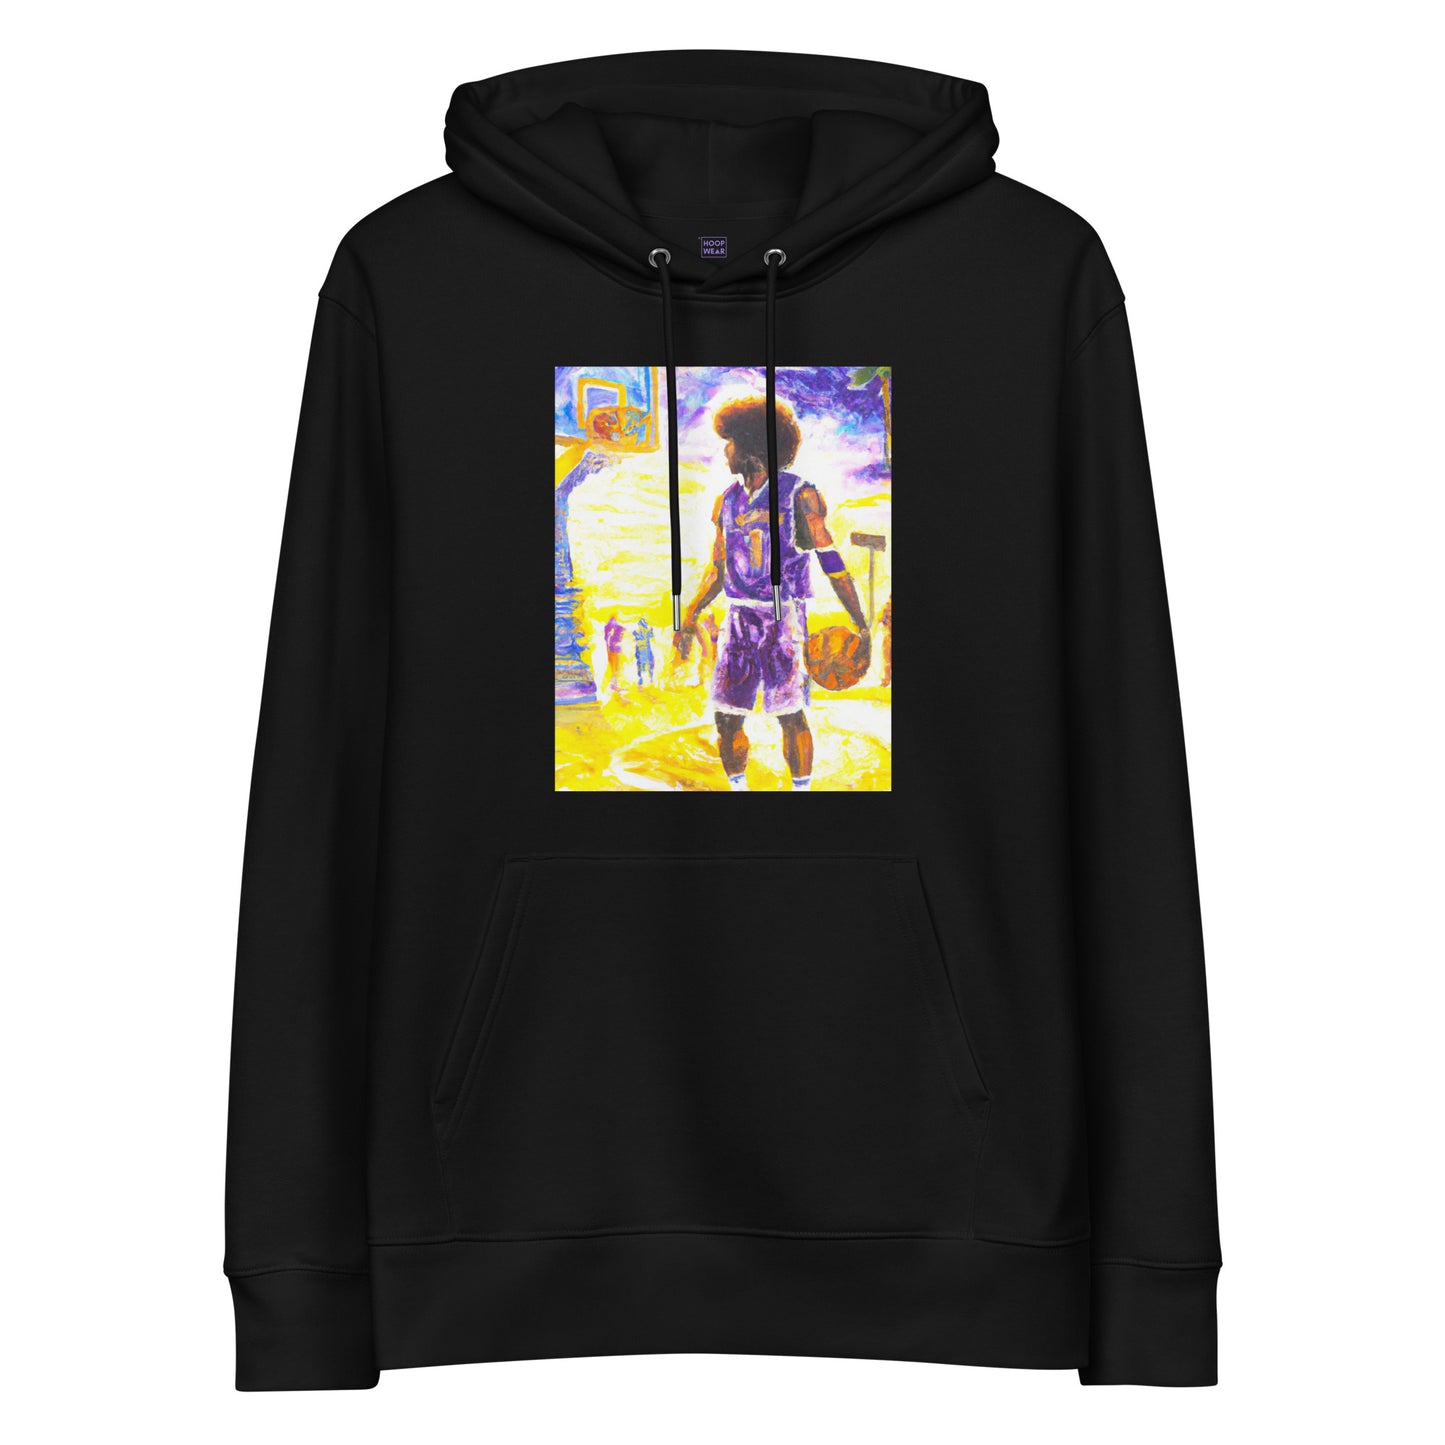 Hoodie "I’m The Girl Your coach Warned You About" - Los Angeles